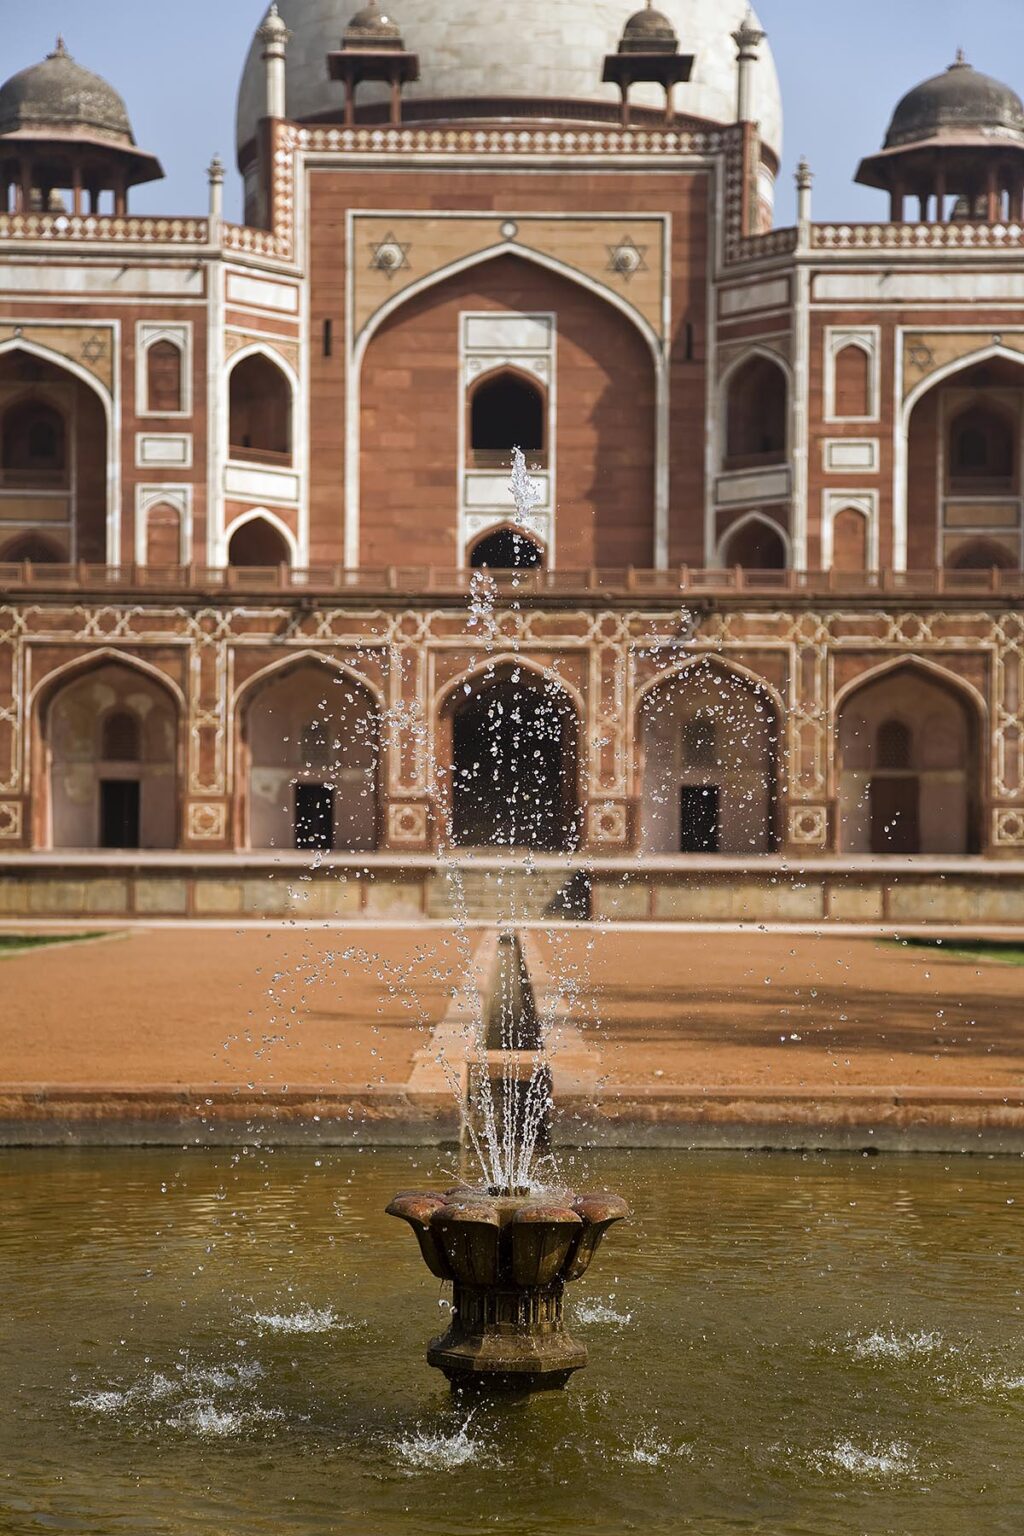 FOUNTAIN and HUMAYUN'S TOMB which was built of white marble and red sandstone in 1565 and is a fine example of MUGHAL architecture - NEW DELHI, INDI